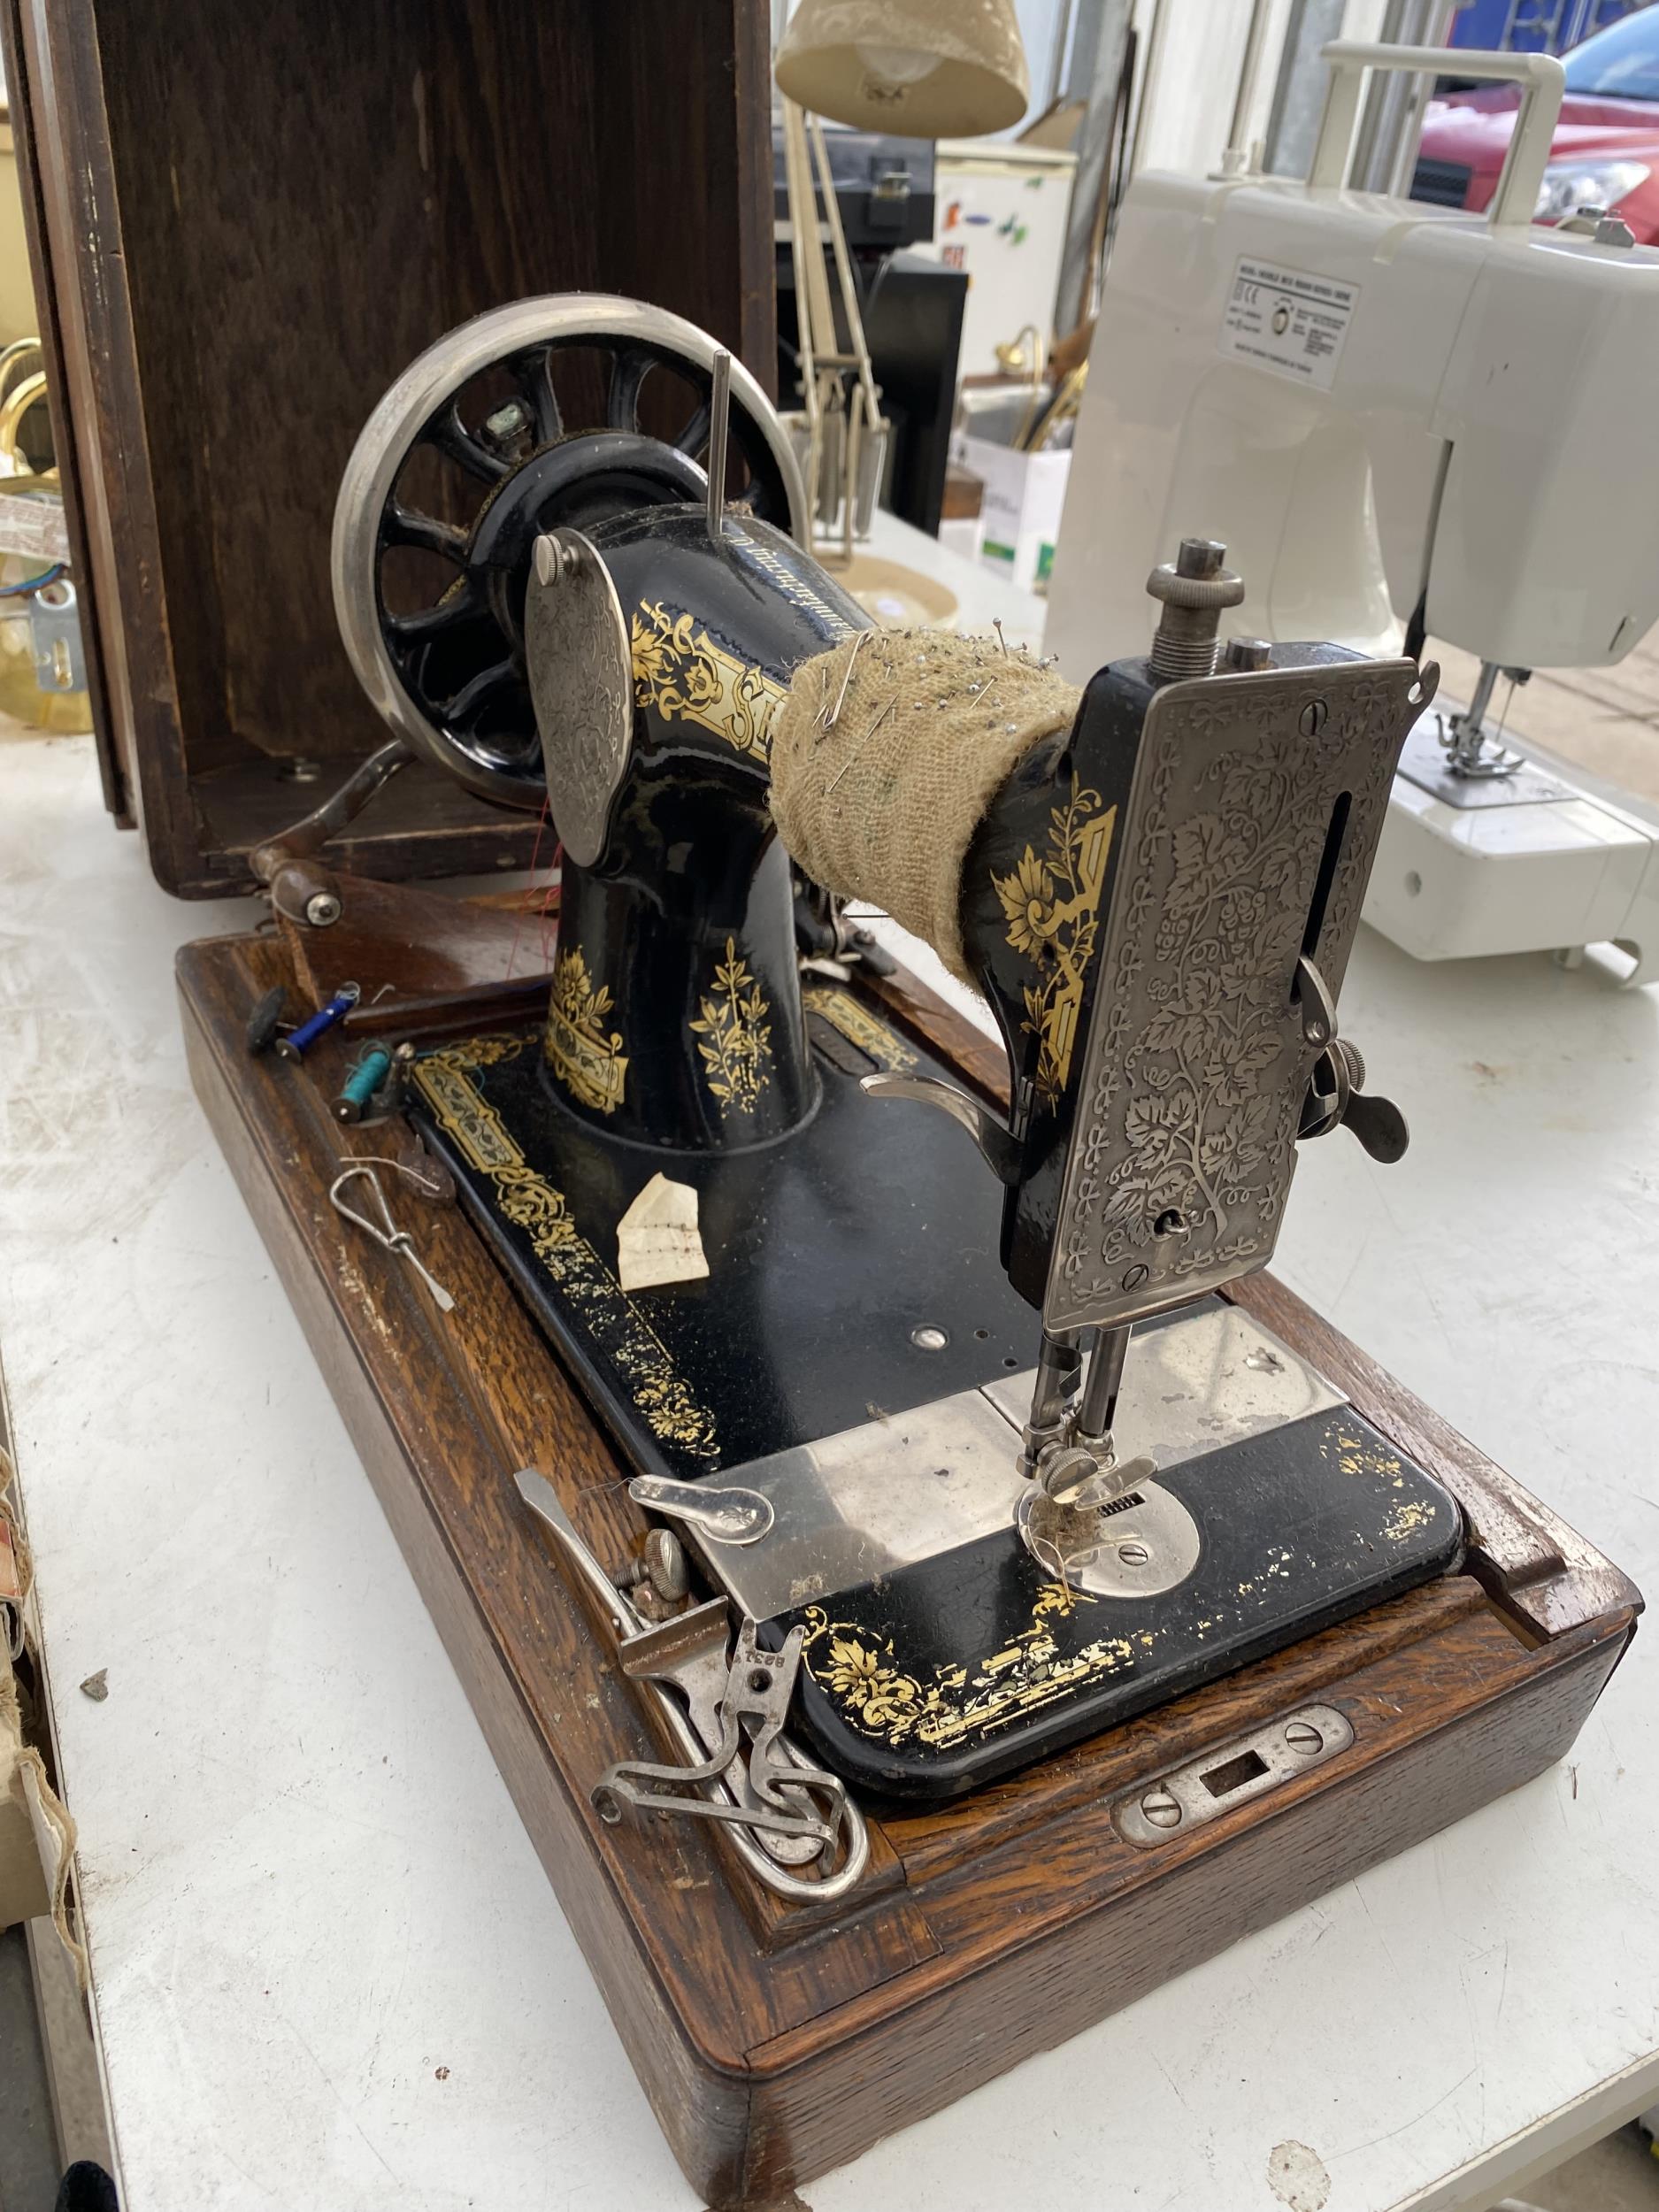 A VINTAGE SINGER SEWING MACHINE WITH WOODEN CARRY CASE - Image 2 of 3